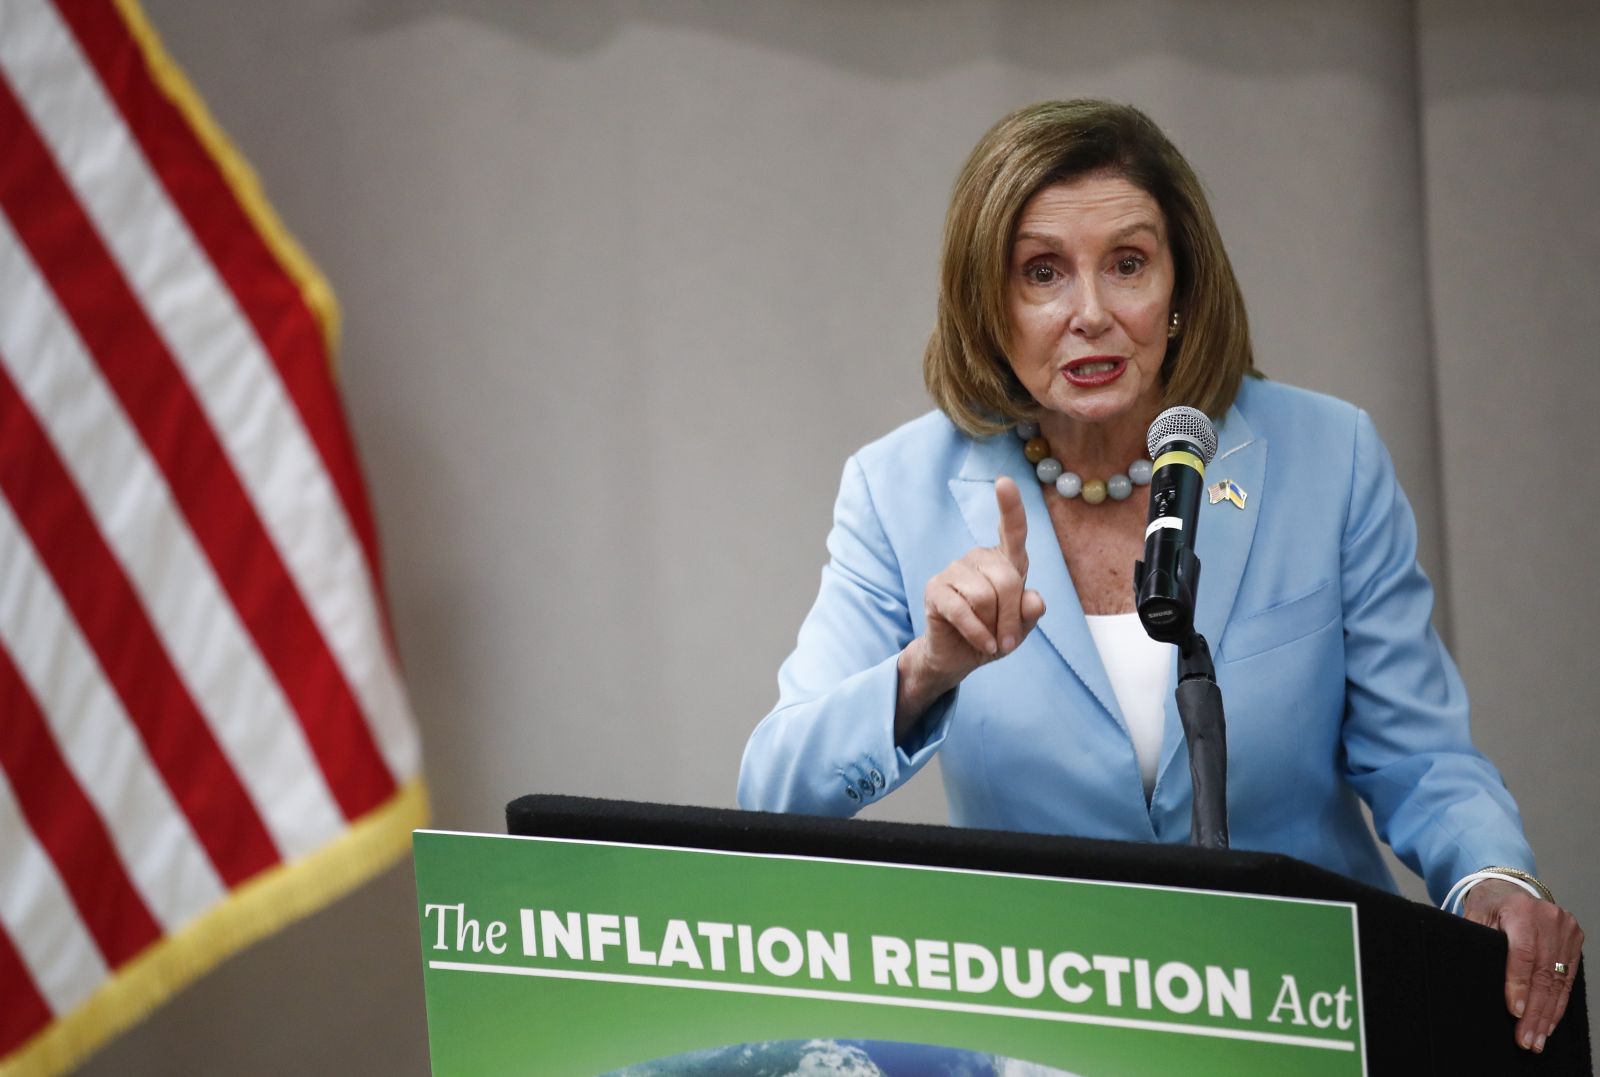 epa10138893 Speaker of the House Nancy Pelosi discusses the Inflation Reduction Act after touring the Los Angeles Cleantech Incubator at the La Kretz Innovation Campus in Los Angeles, California, USA, 25 August 2022.  EPA/CAROLINE BREHMAN